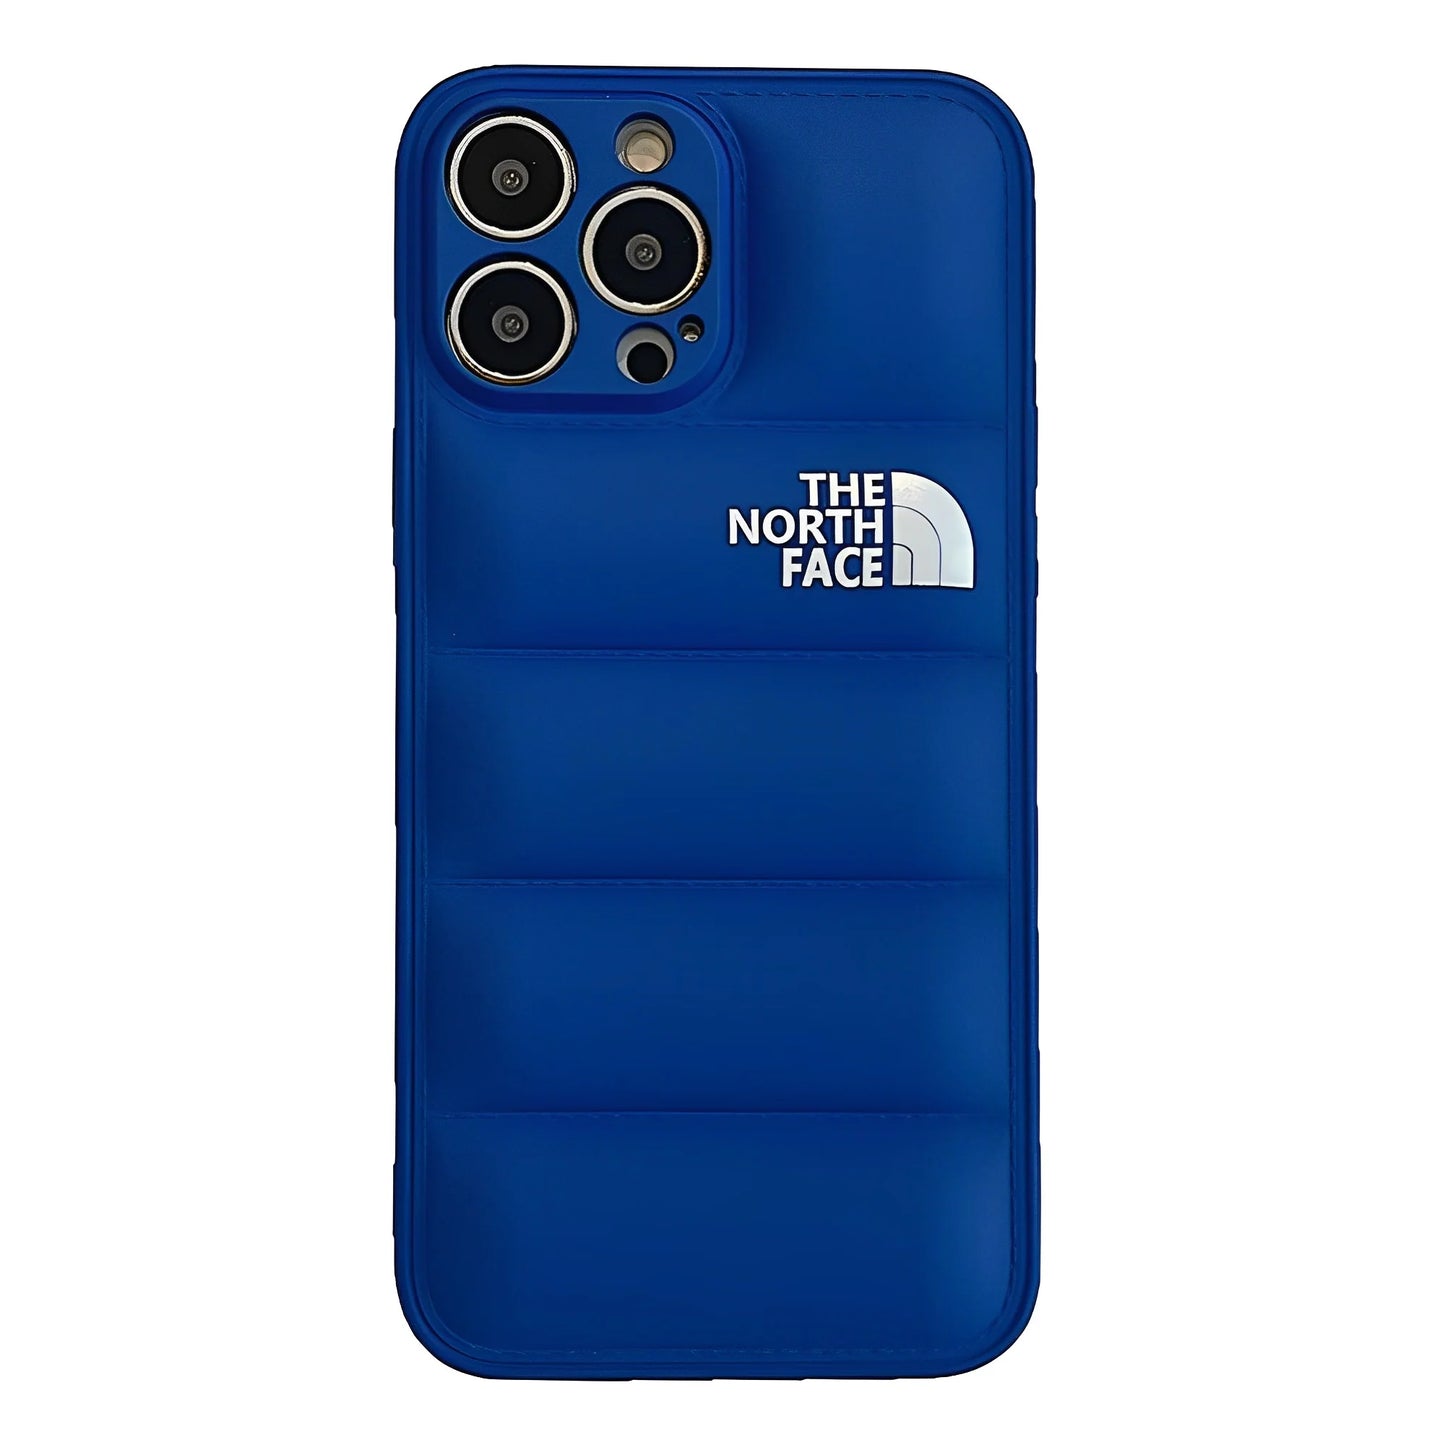 North Face Iphone Covers